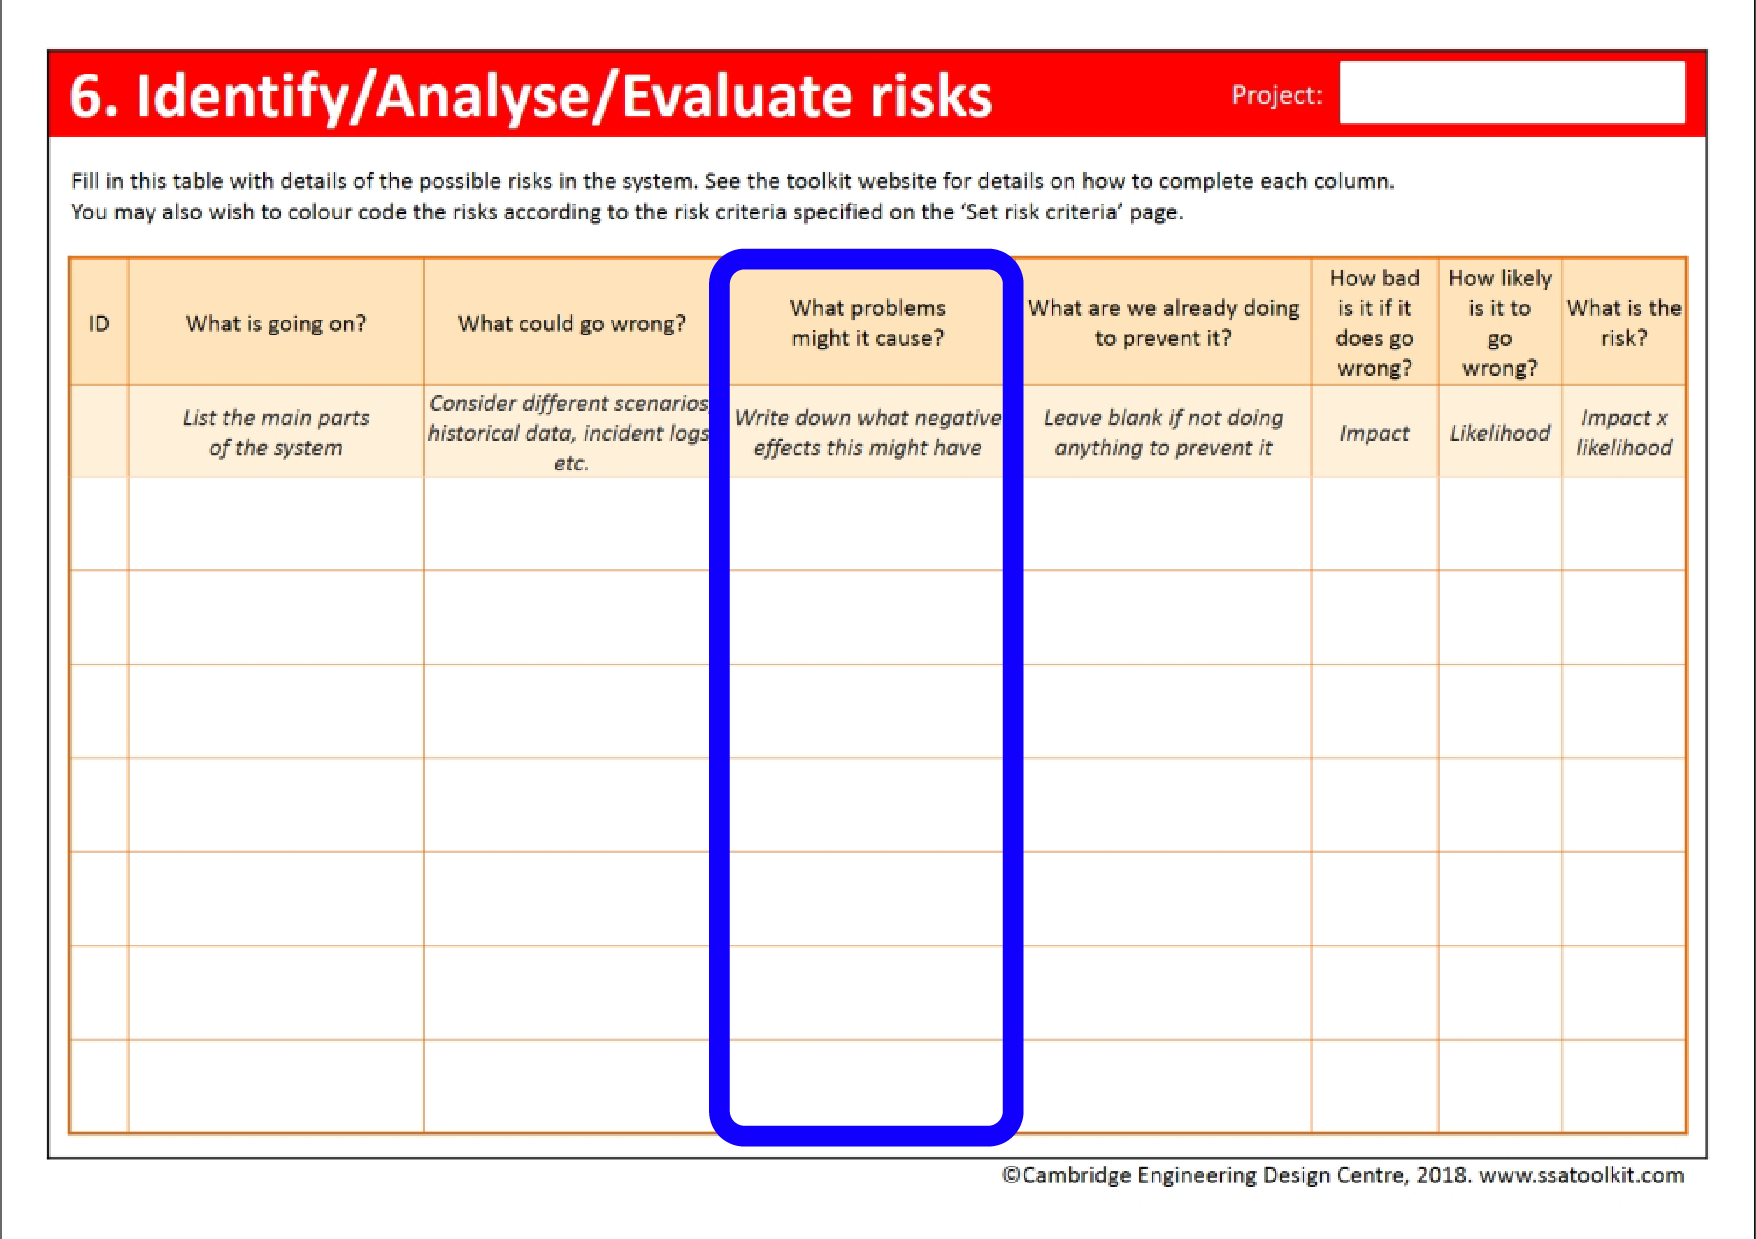 Screenshot of the Risks page of the assessment form